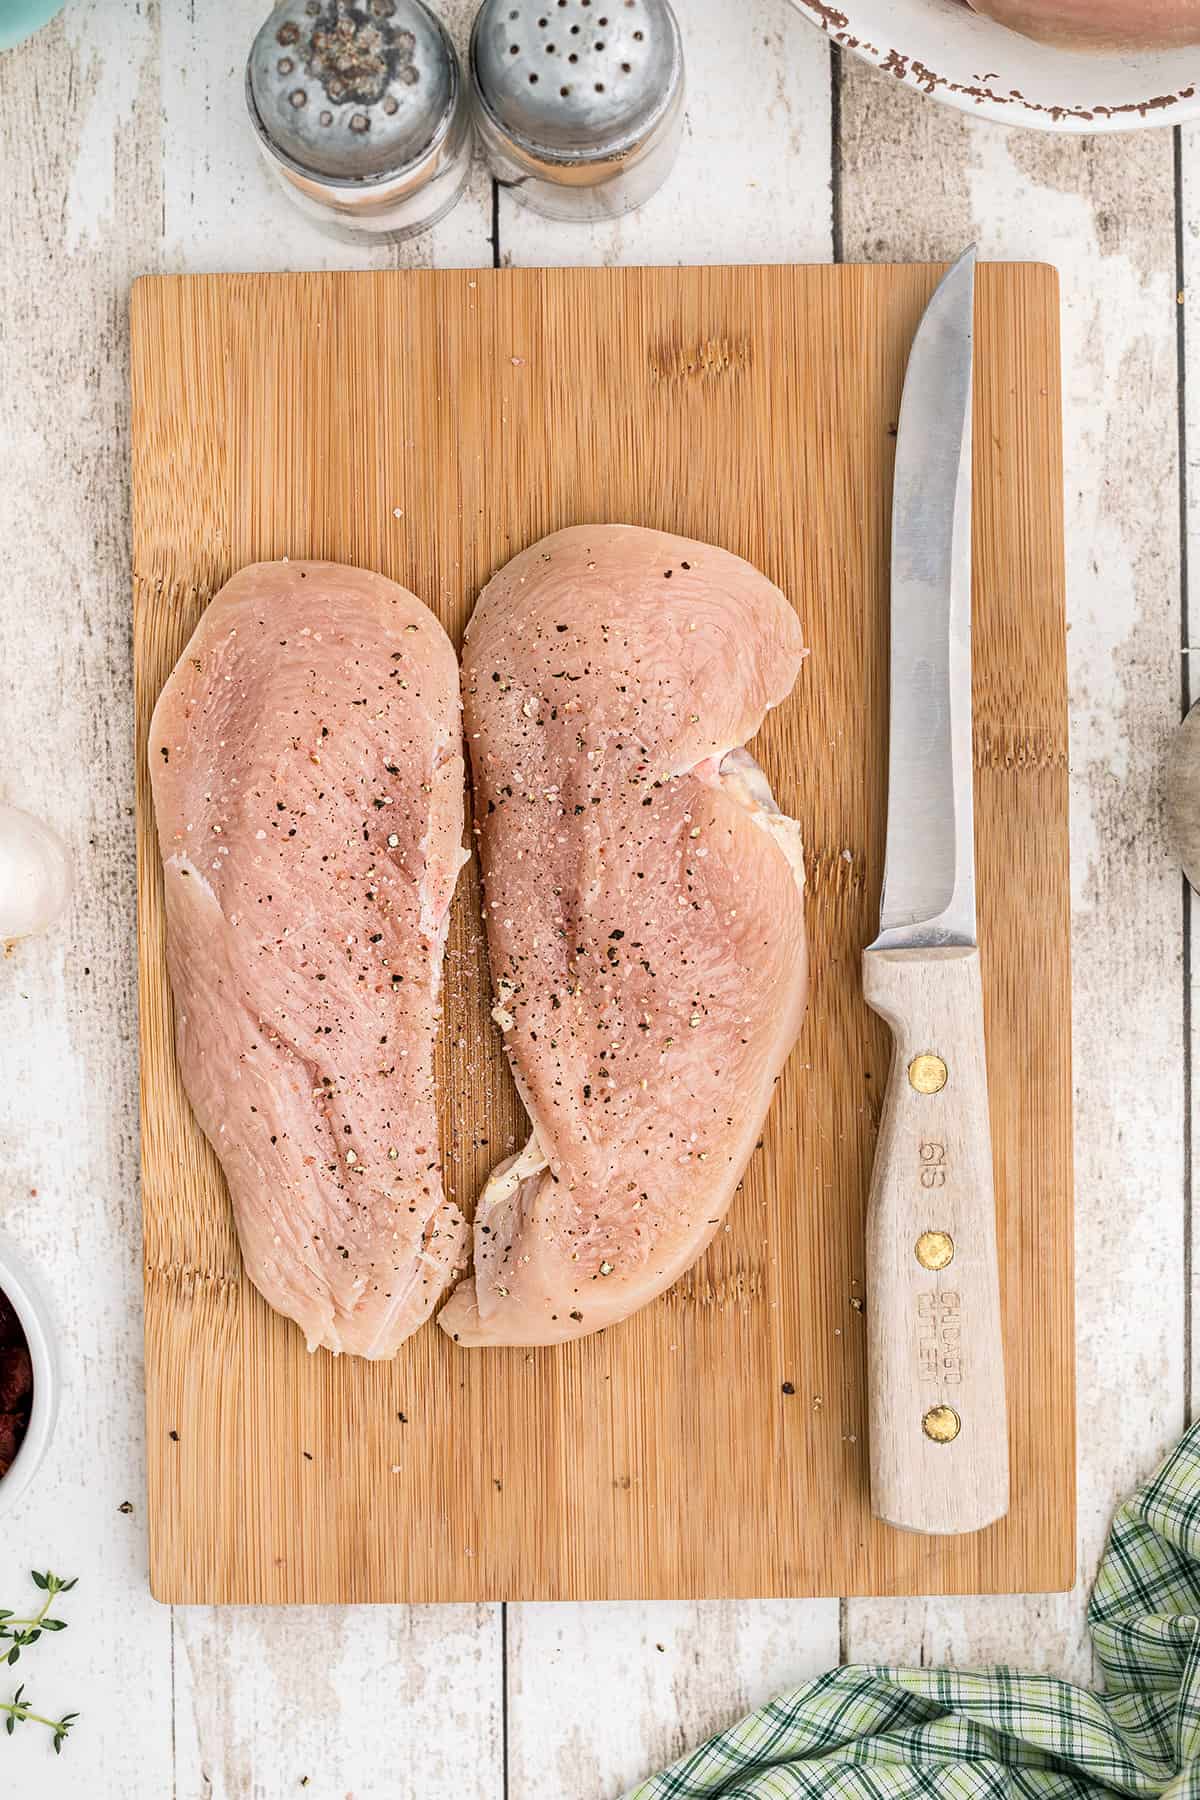 Raw chicken breasts and a knife on a wooden board.